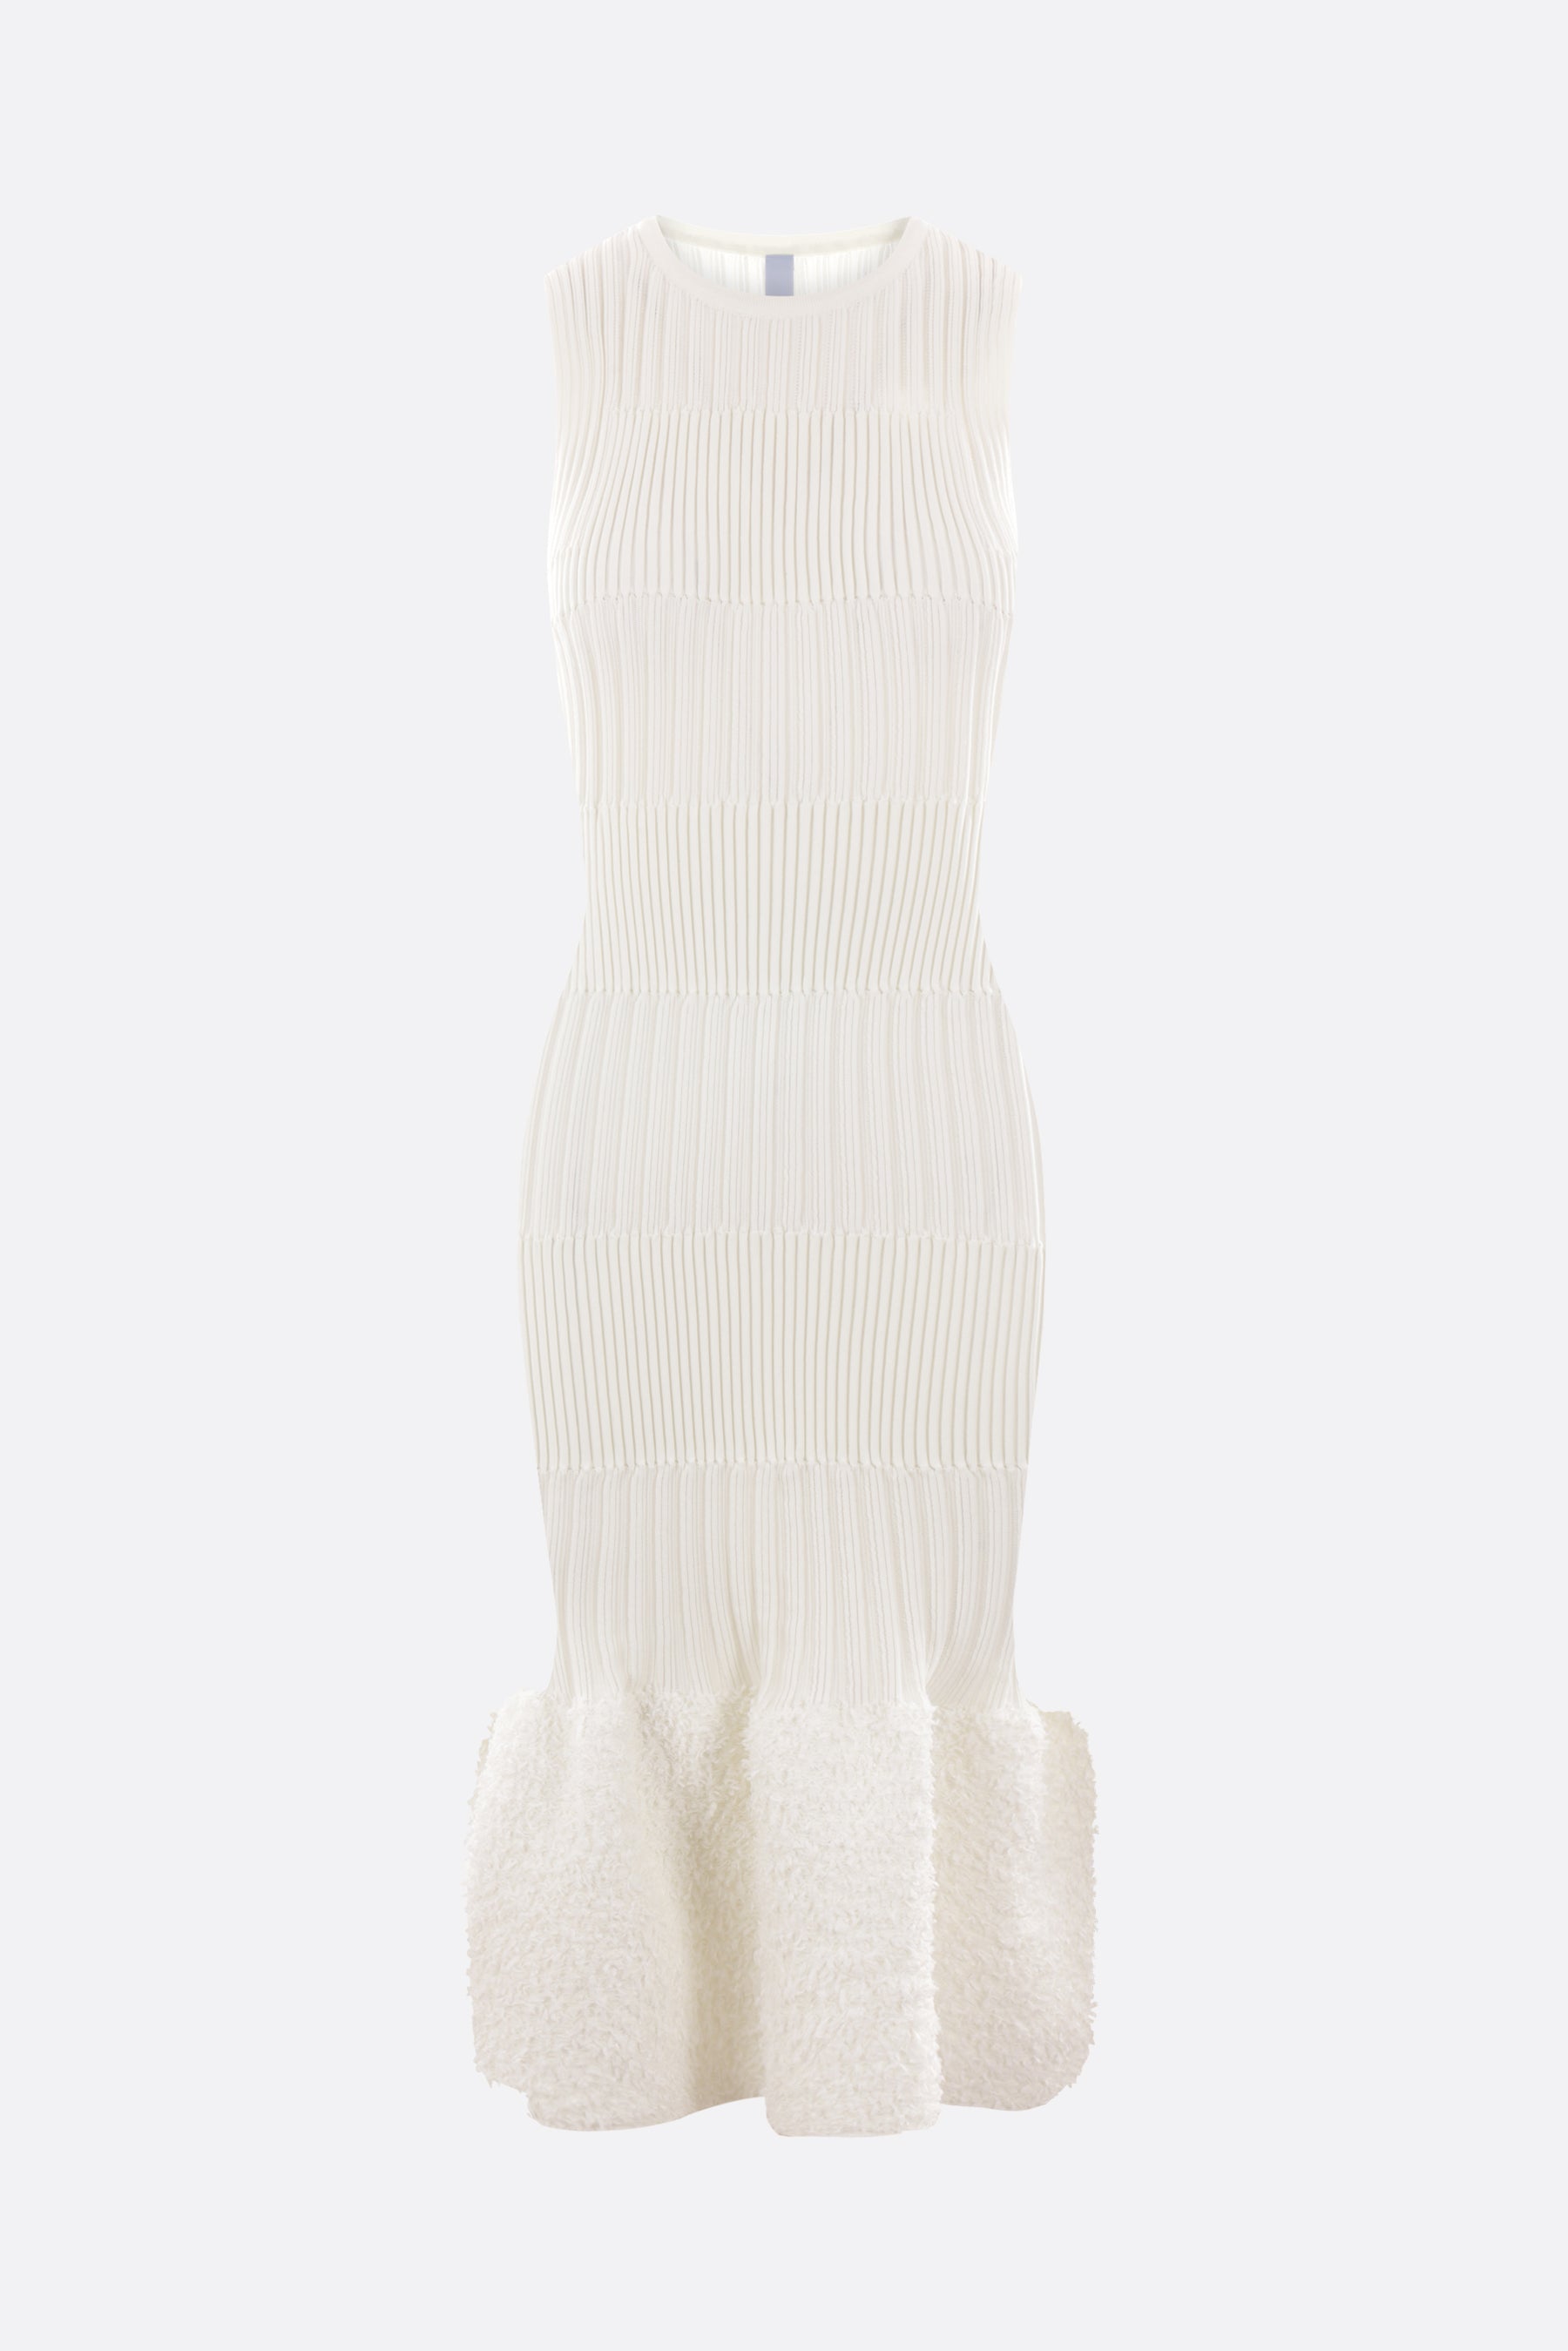 Fluted Reef mermaid sleeveless dress in technical knit